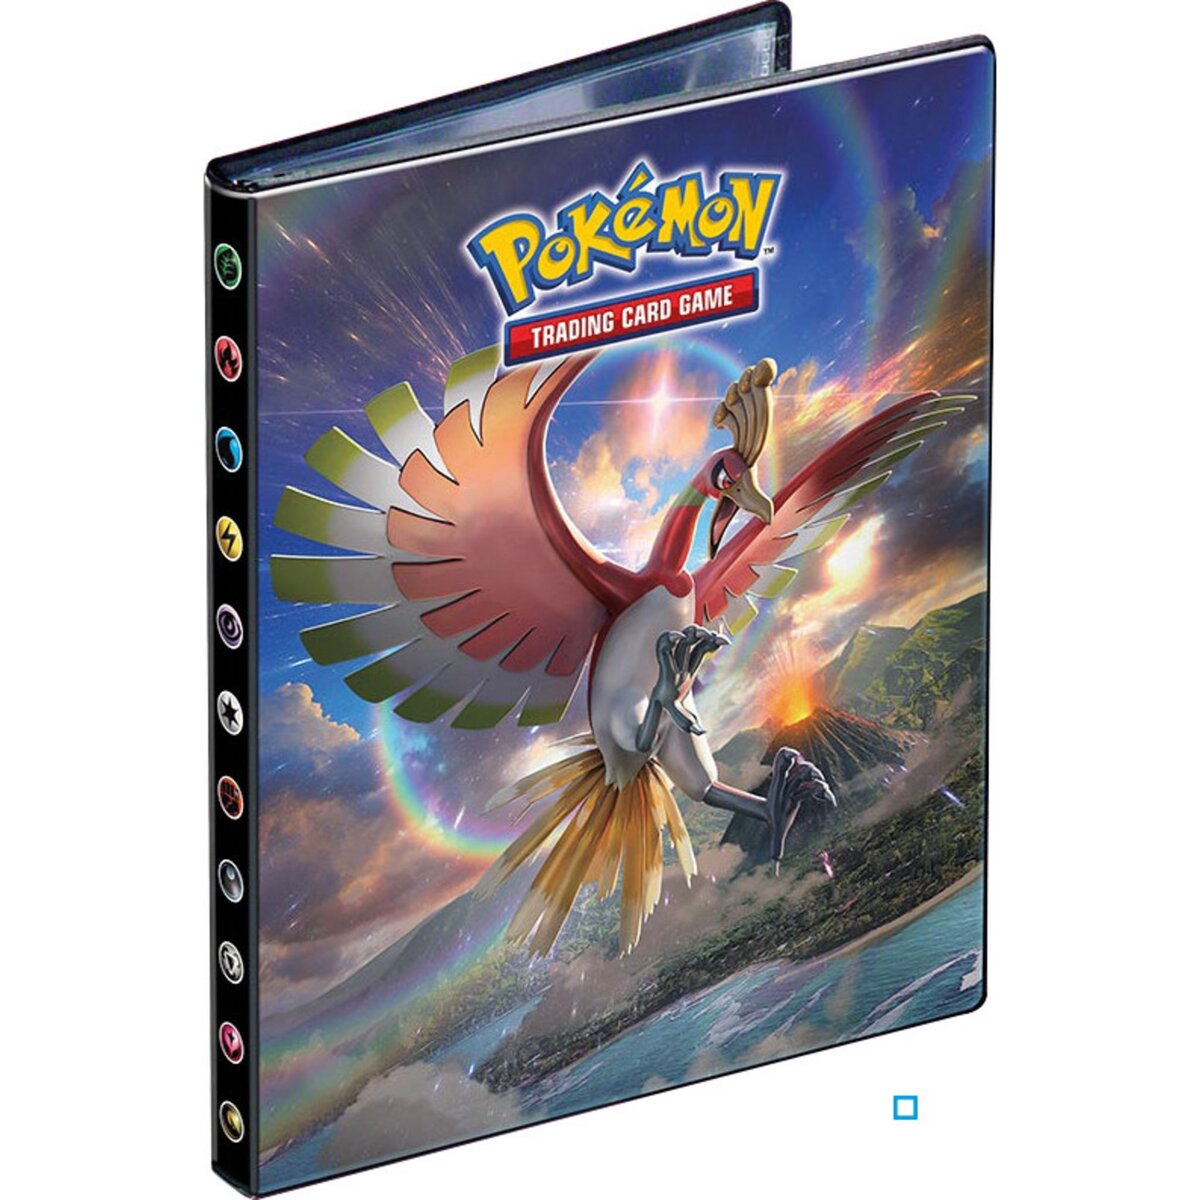 ASMODEE Pokemon Soleil et Lune - Cahier A5 range-cartes 80 emplacements  